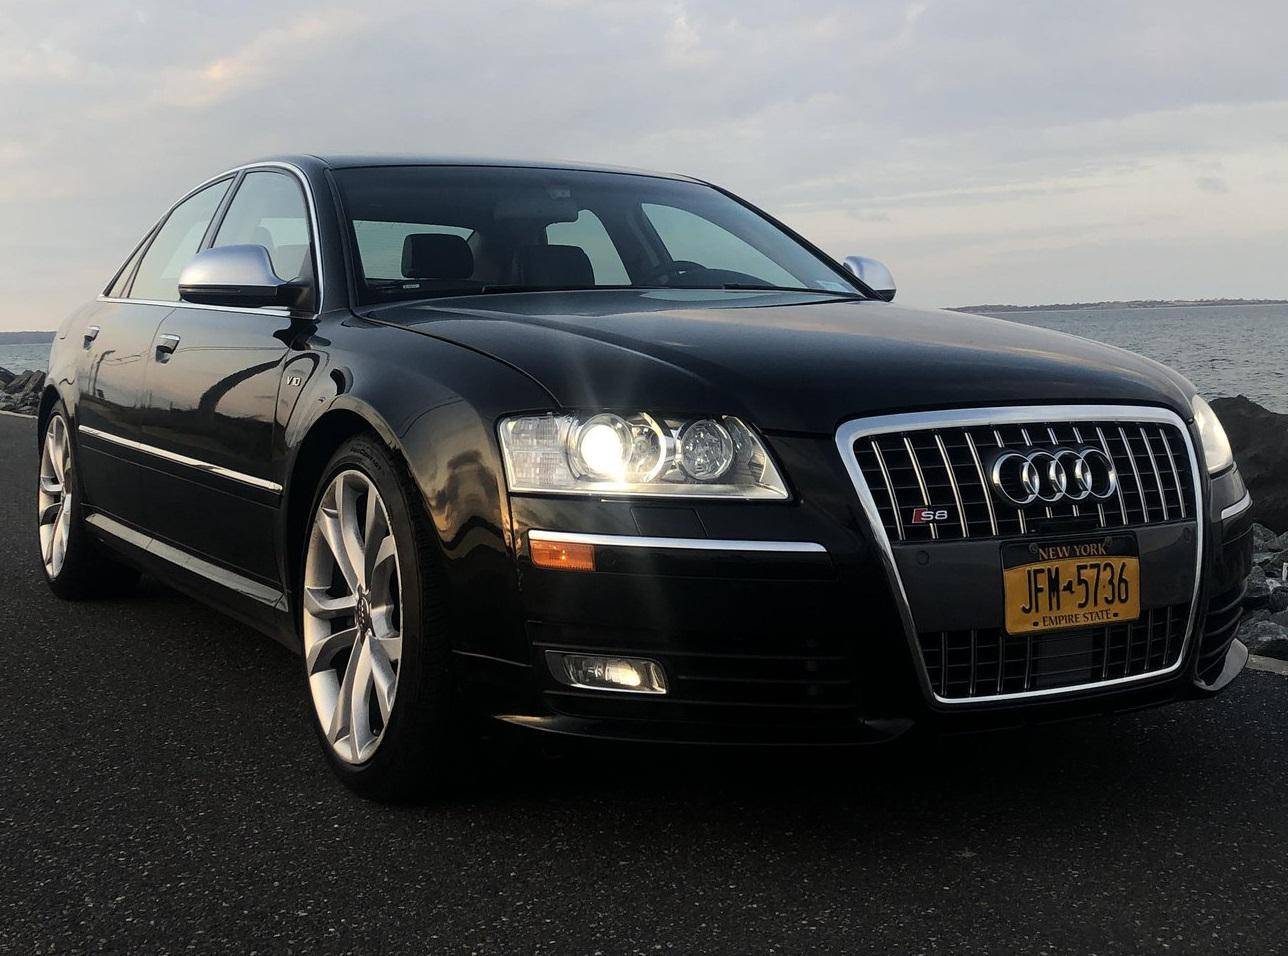 2008 Audi S8 Outdoor Car Cover